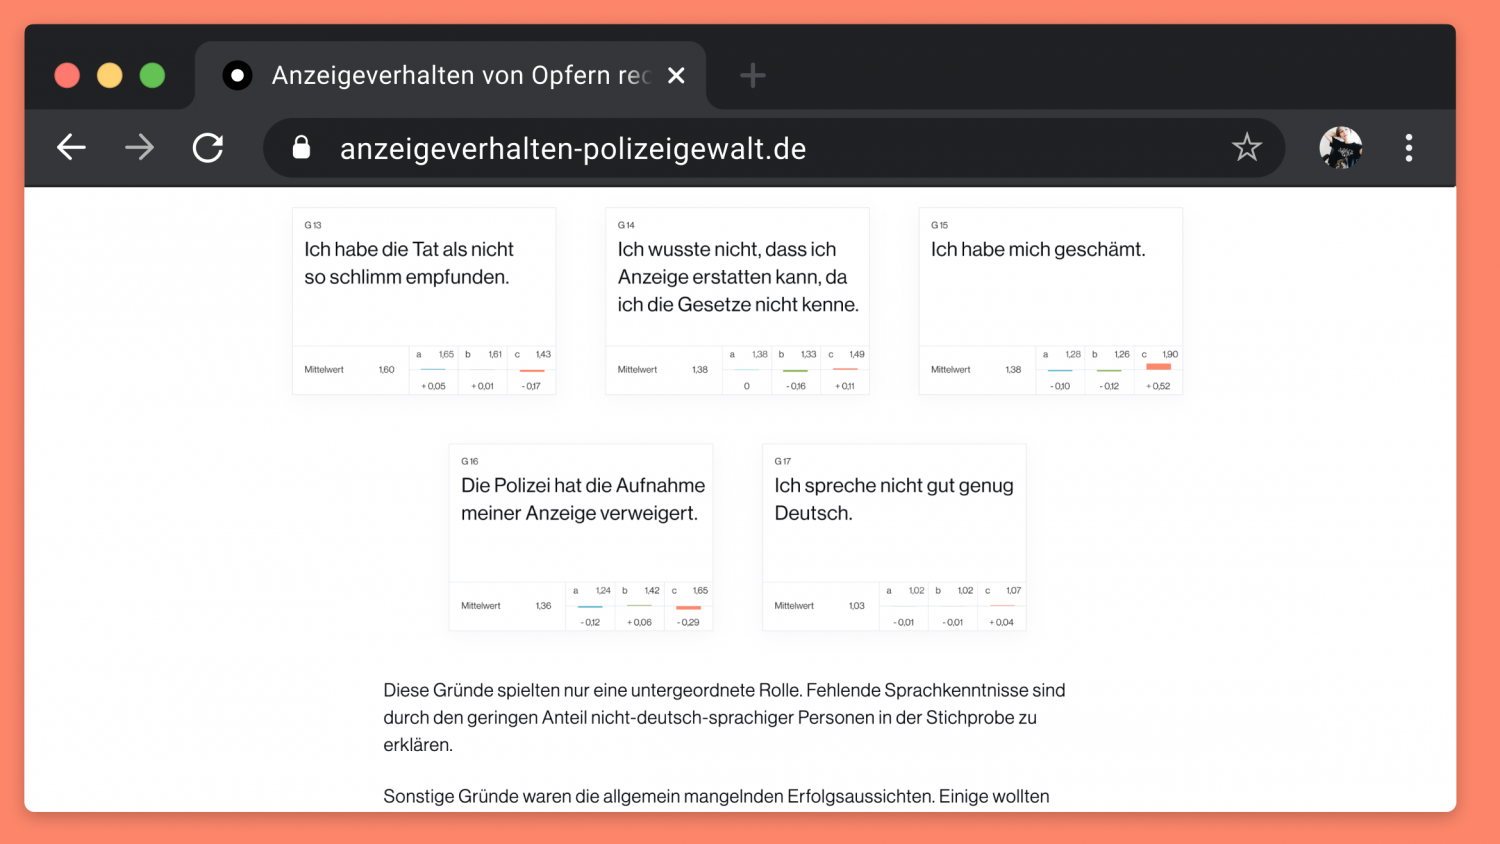 Visualizing crime reporting behaviour of victims of unlawful police violence in Germany